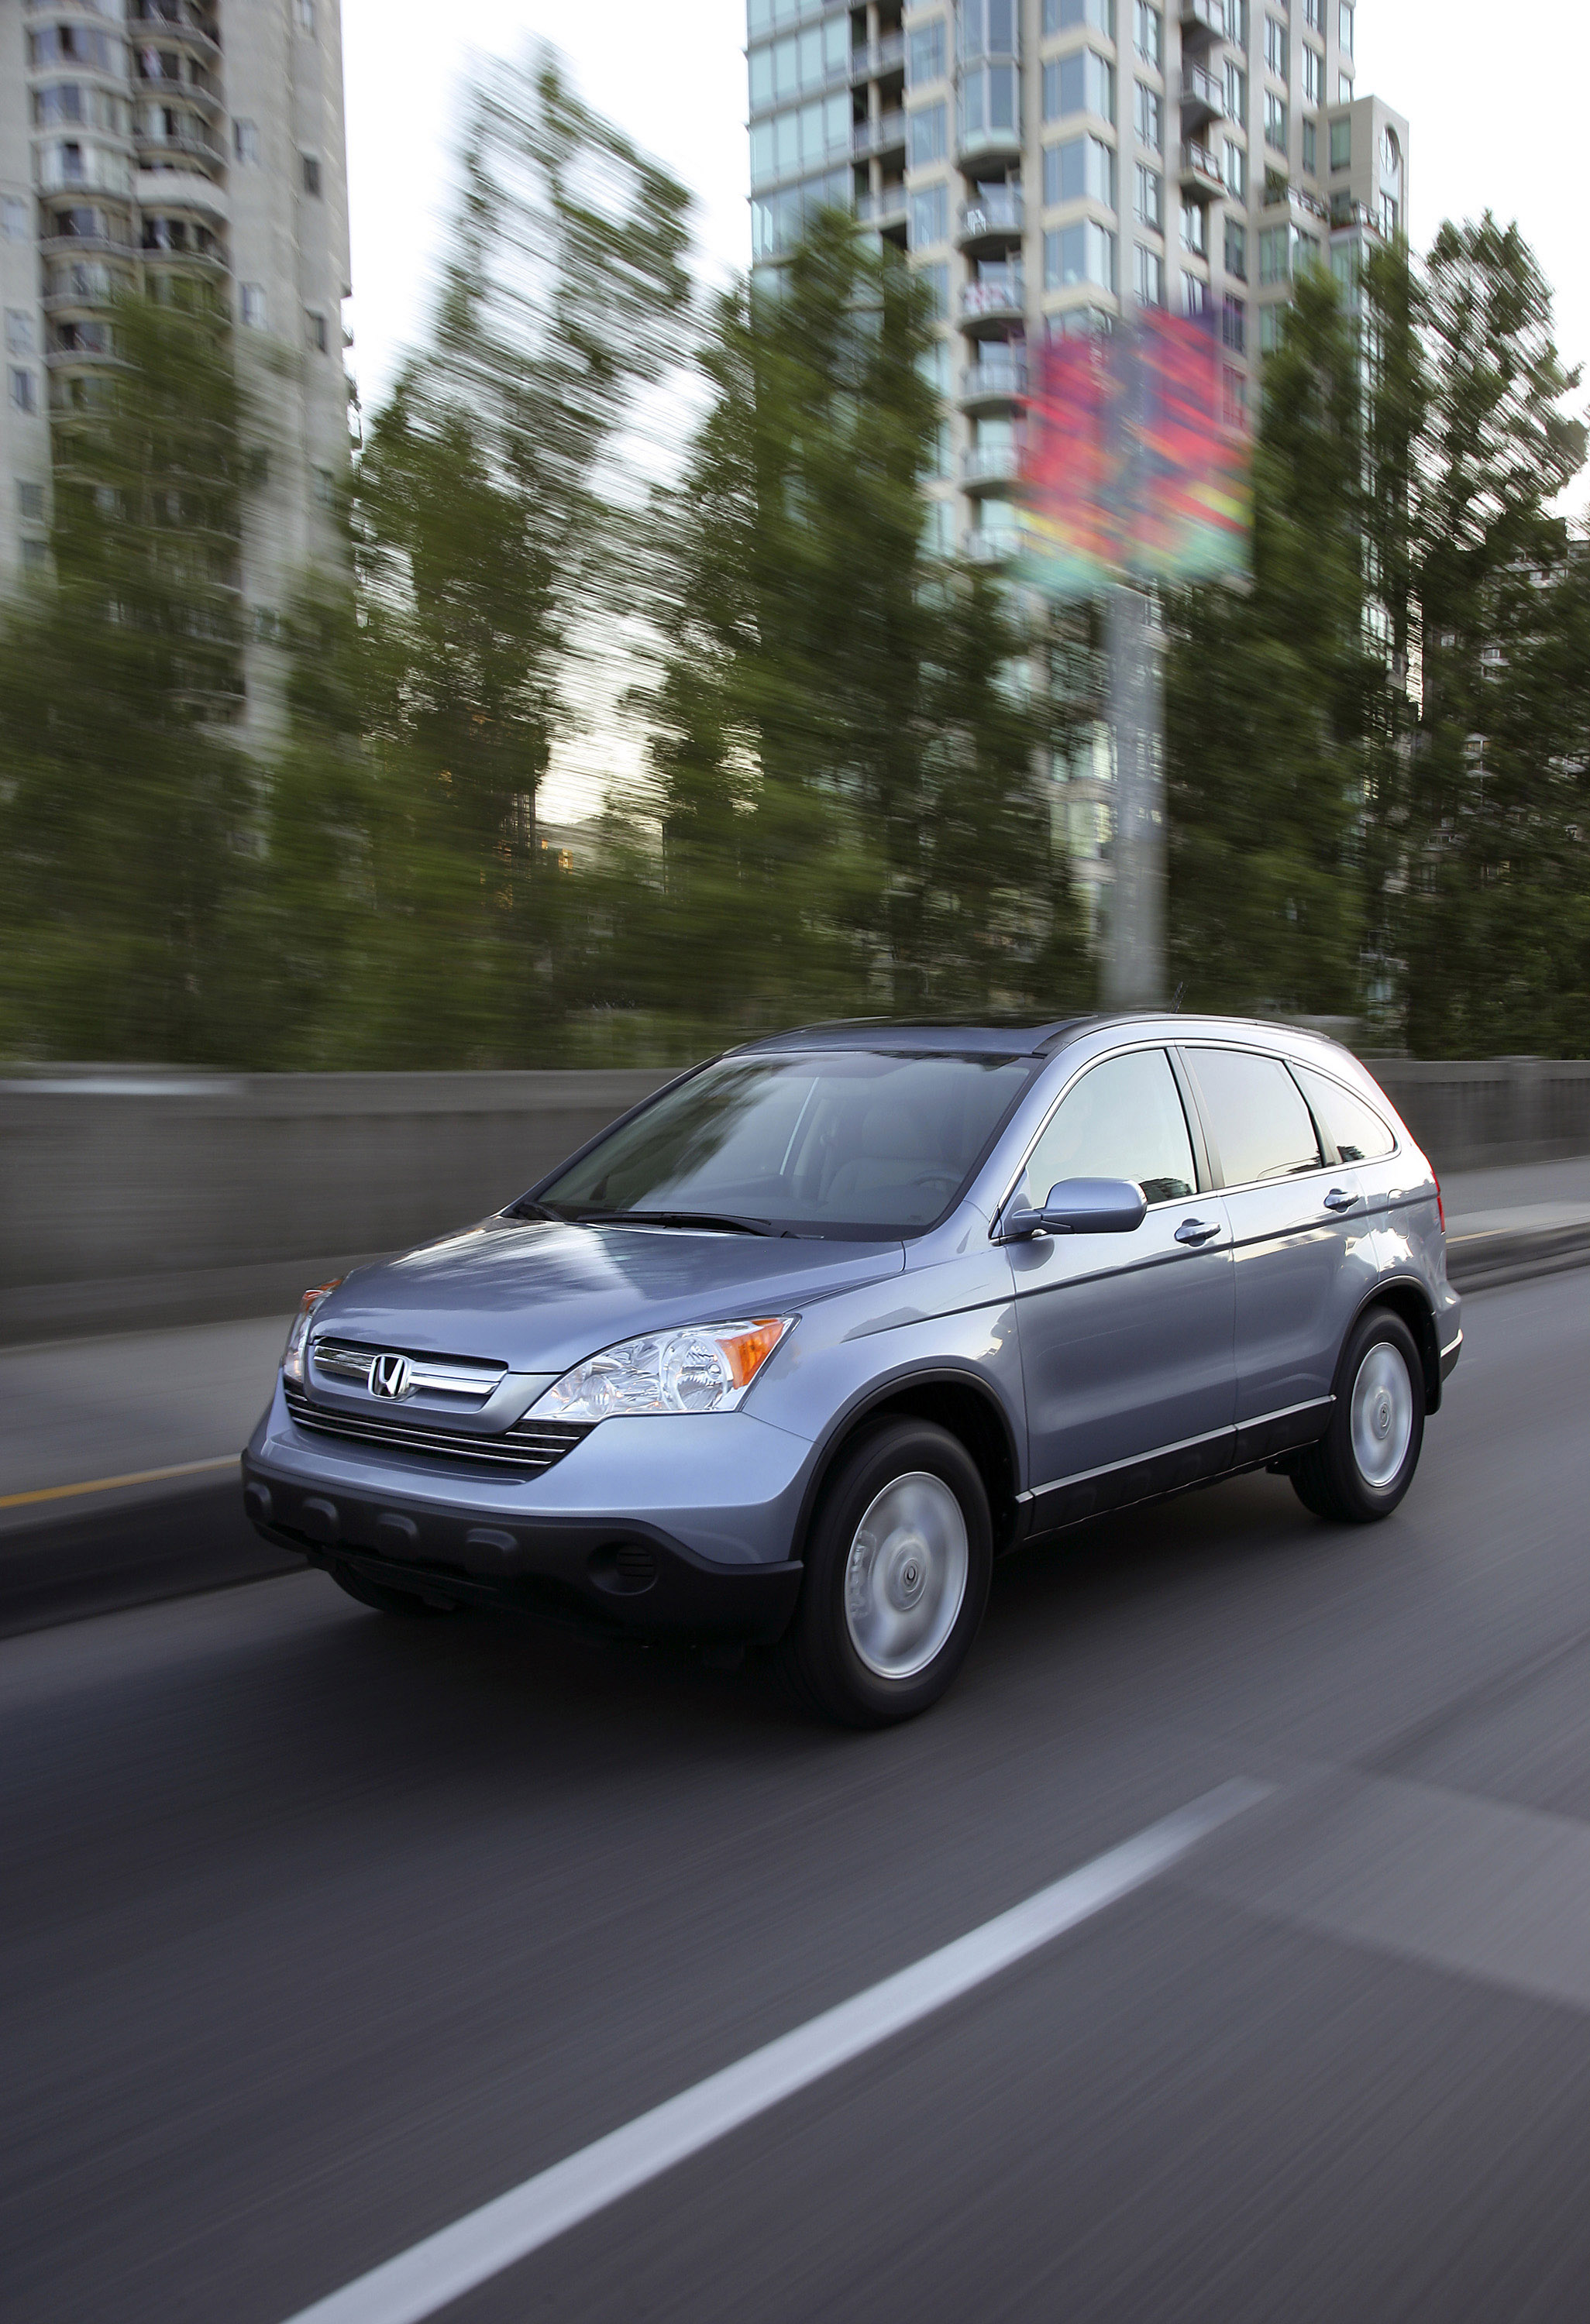 2009 Honda CR-V Delivers Refined and Stylish Approach to Entry-SUV Segment